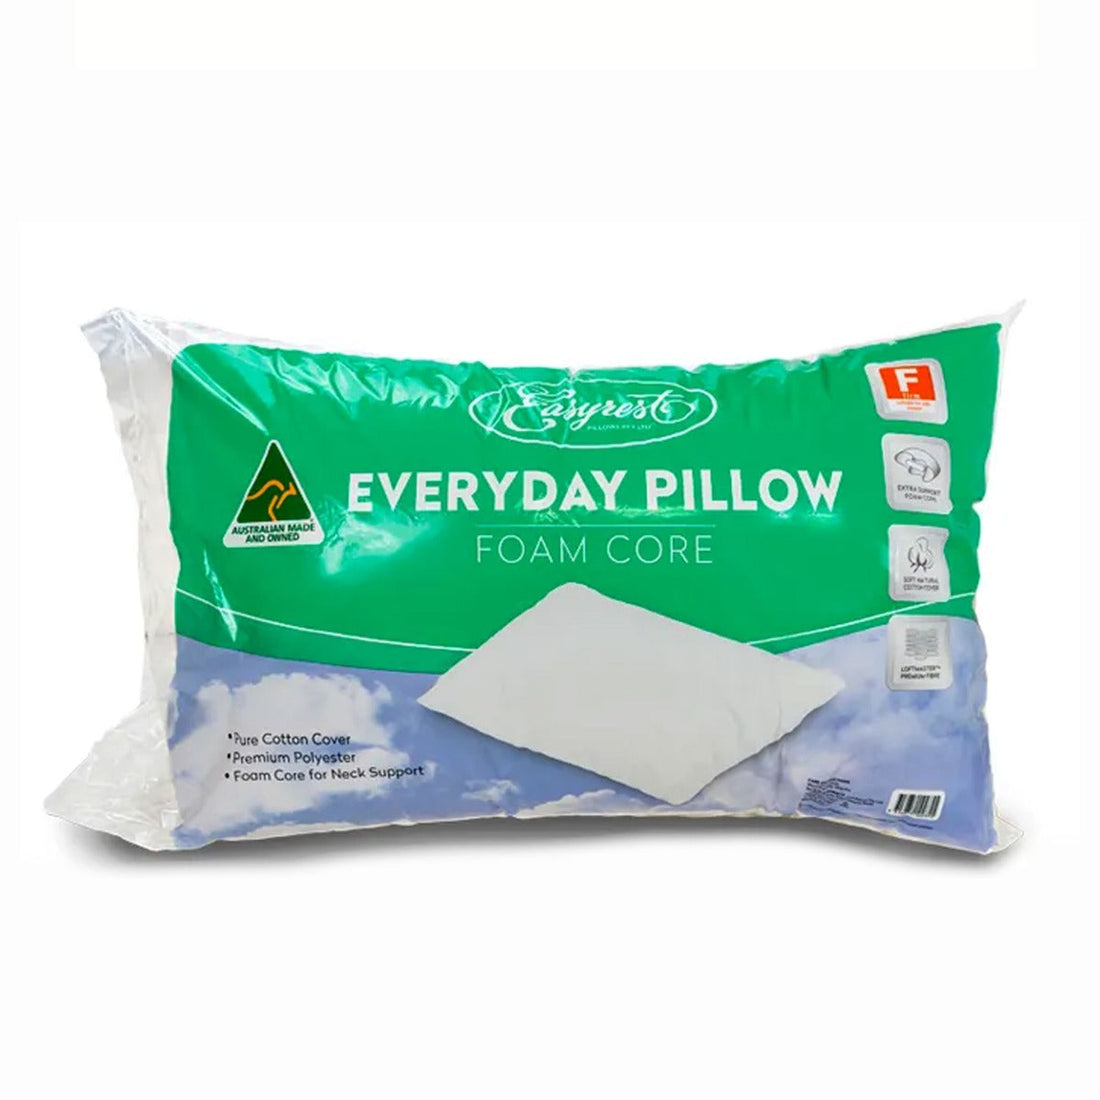 Everyday Foam Cored Queen Sized Pillow